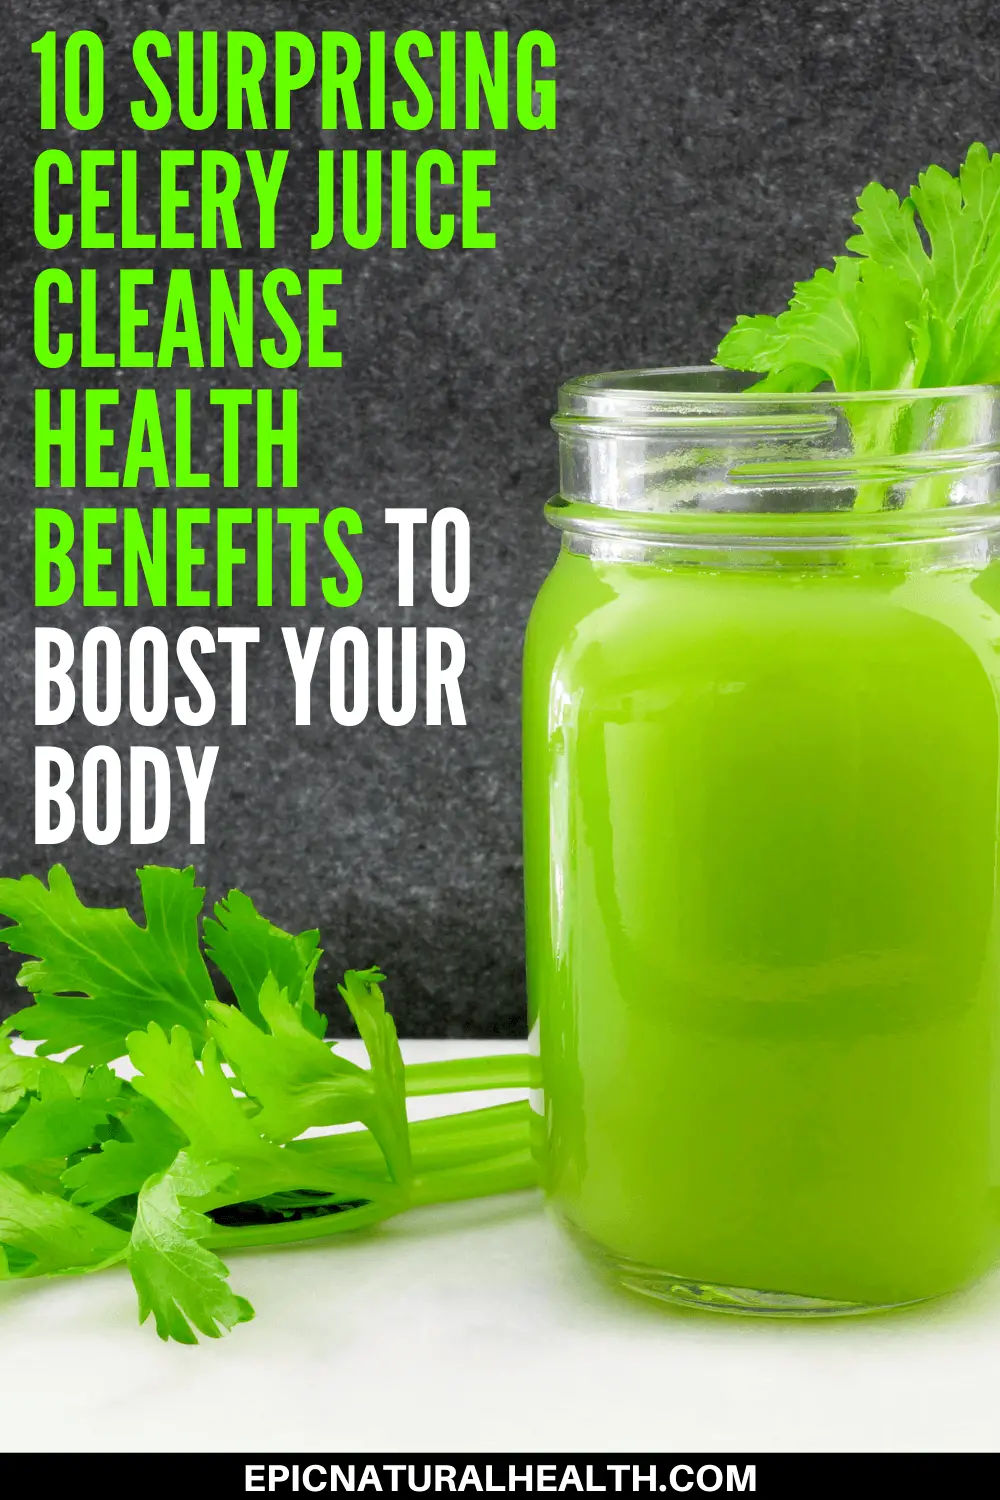 10 surprising celery juice cleanse health benefits to boost your body